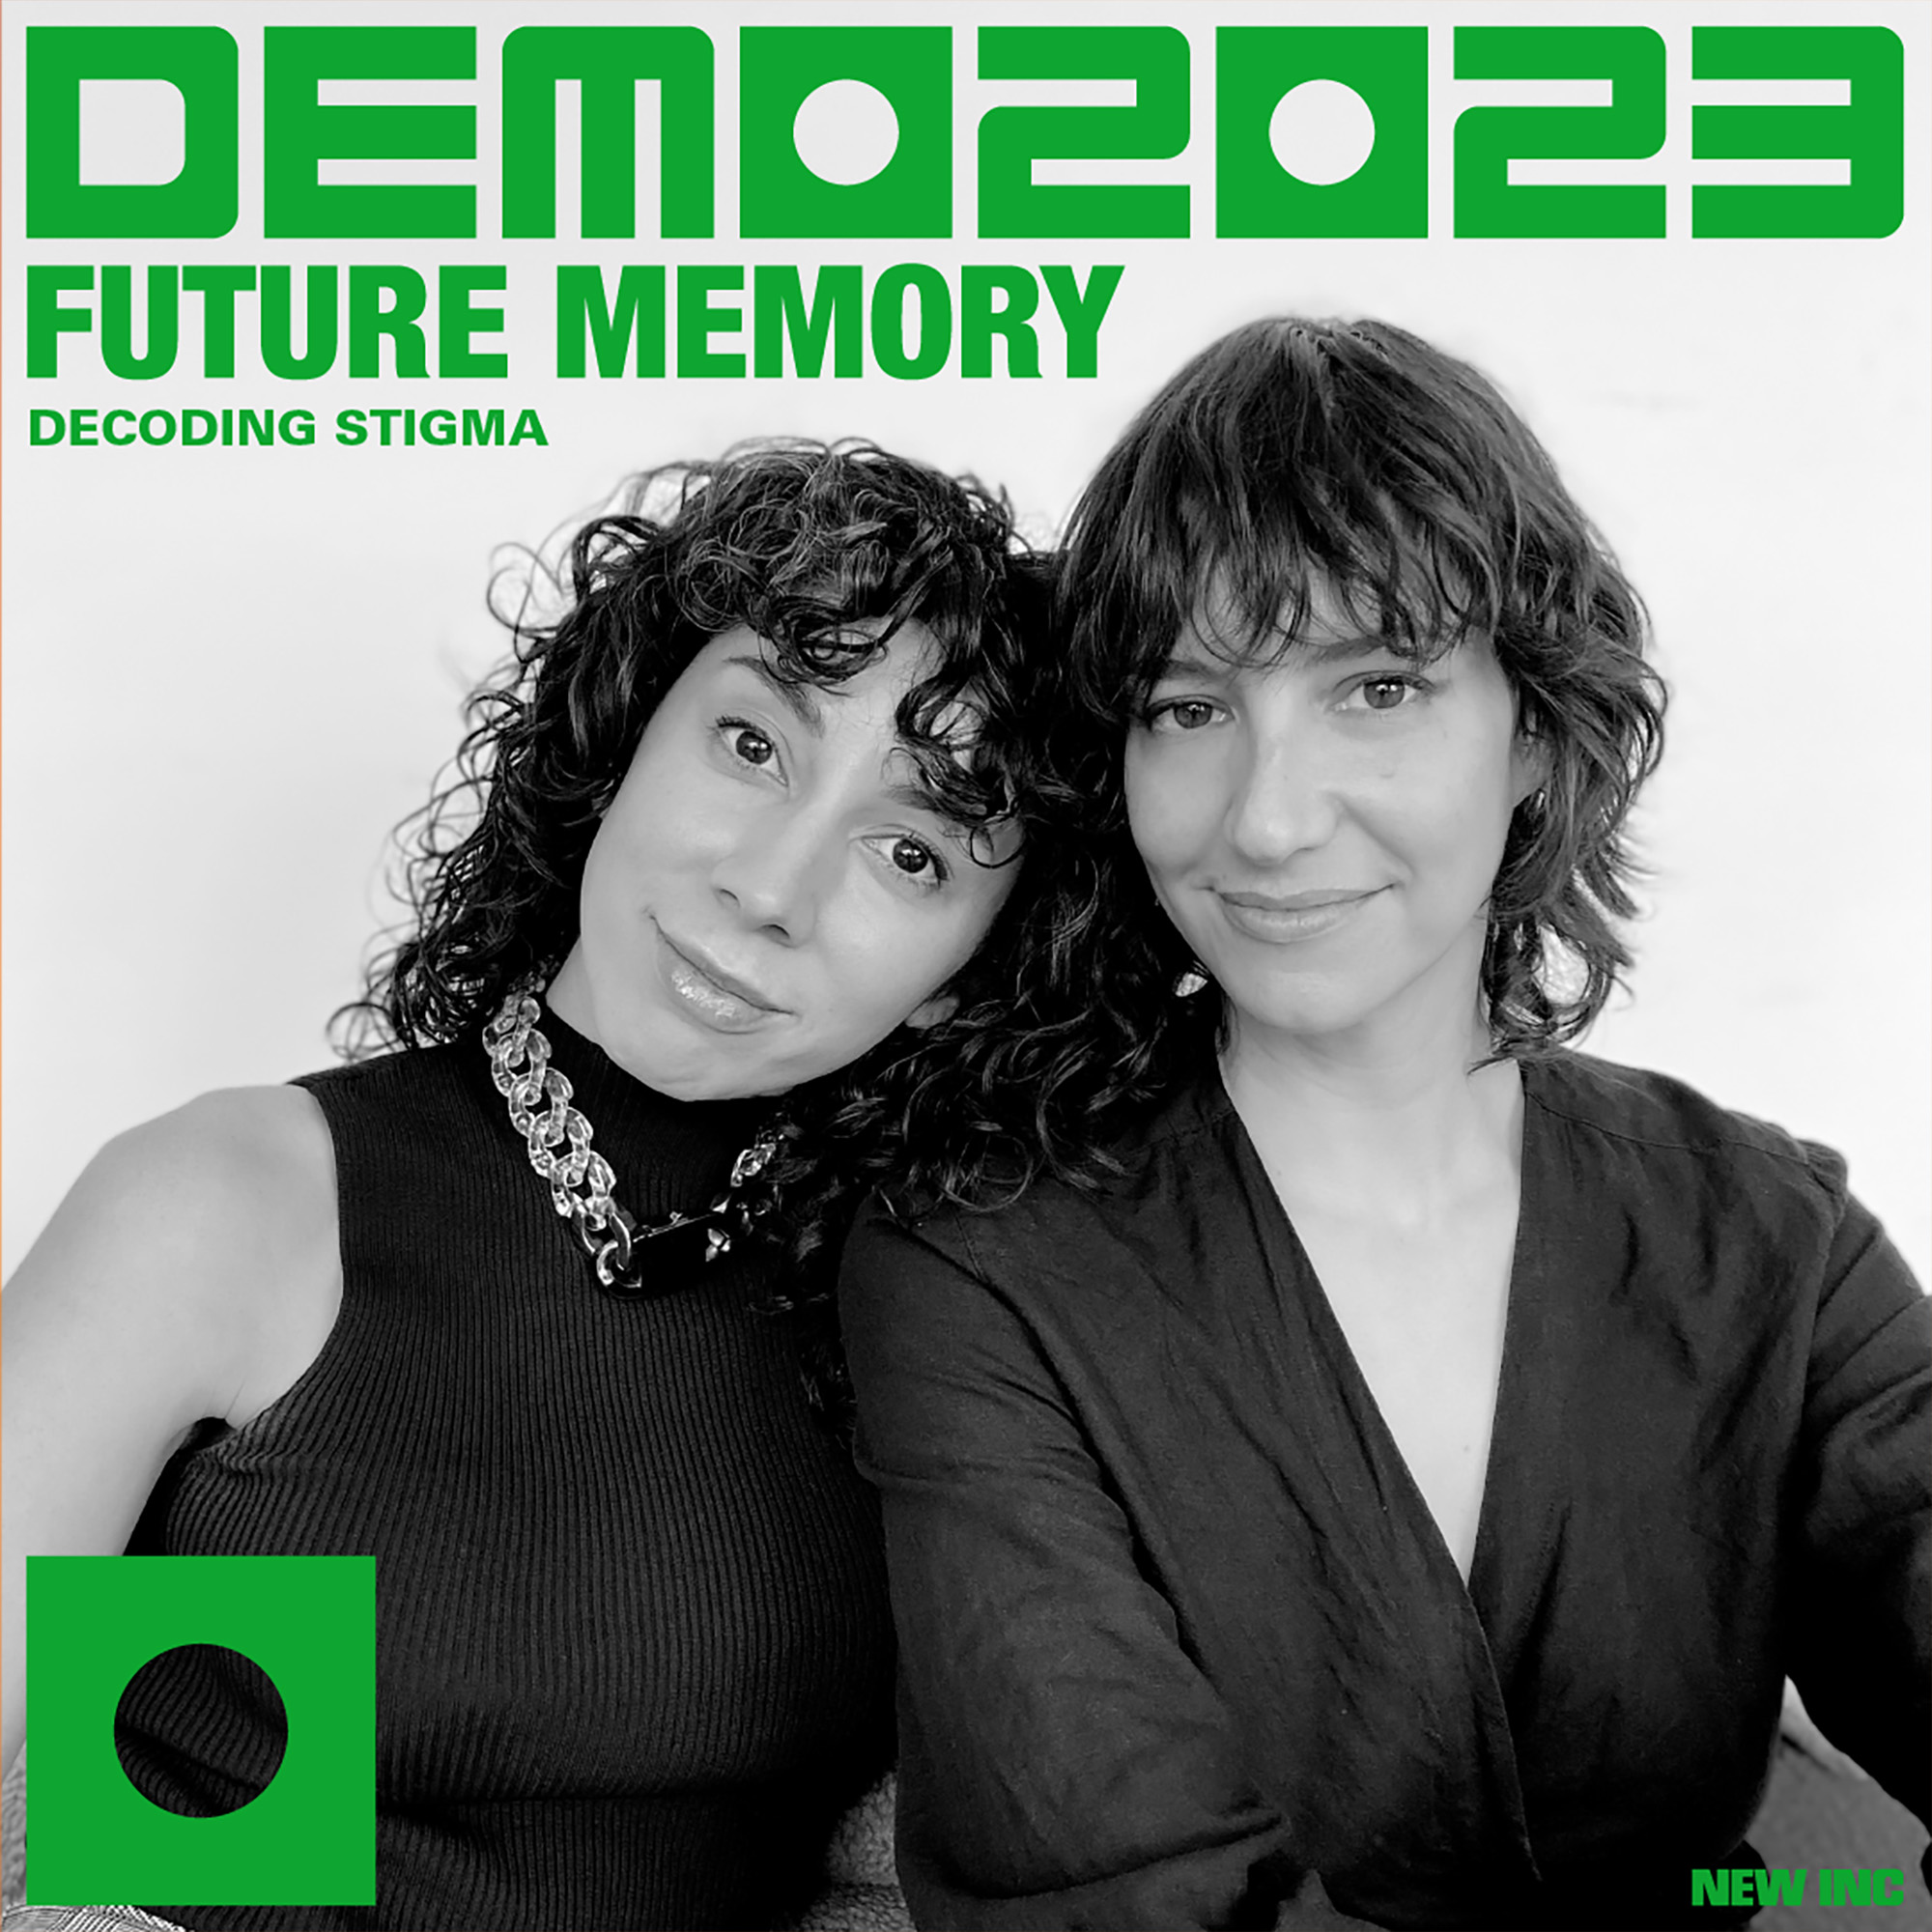 A flyer for Demo2023: Future Memory shows Gabriella and Livia with their heads leaning together.